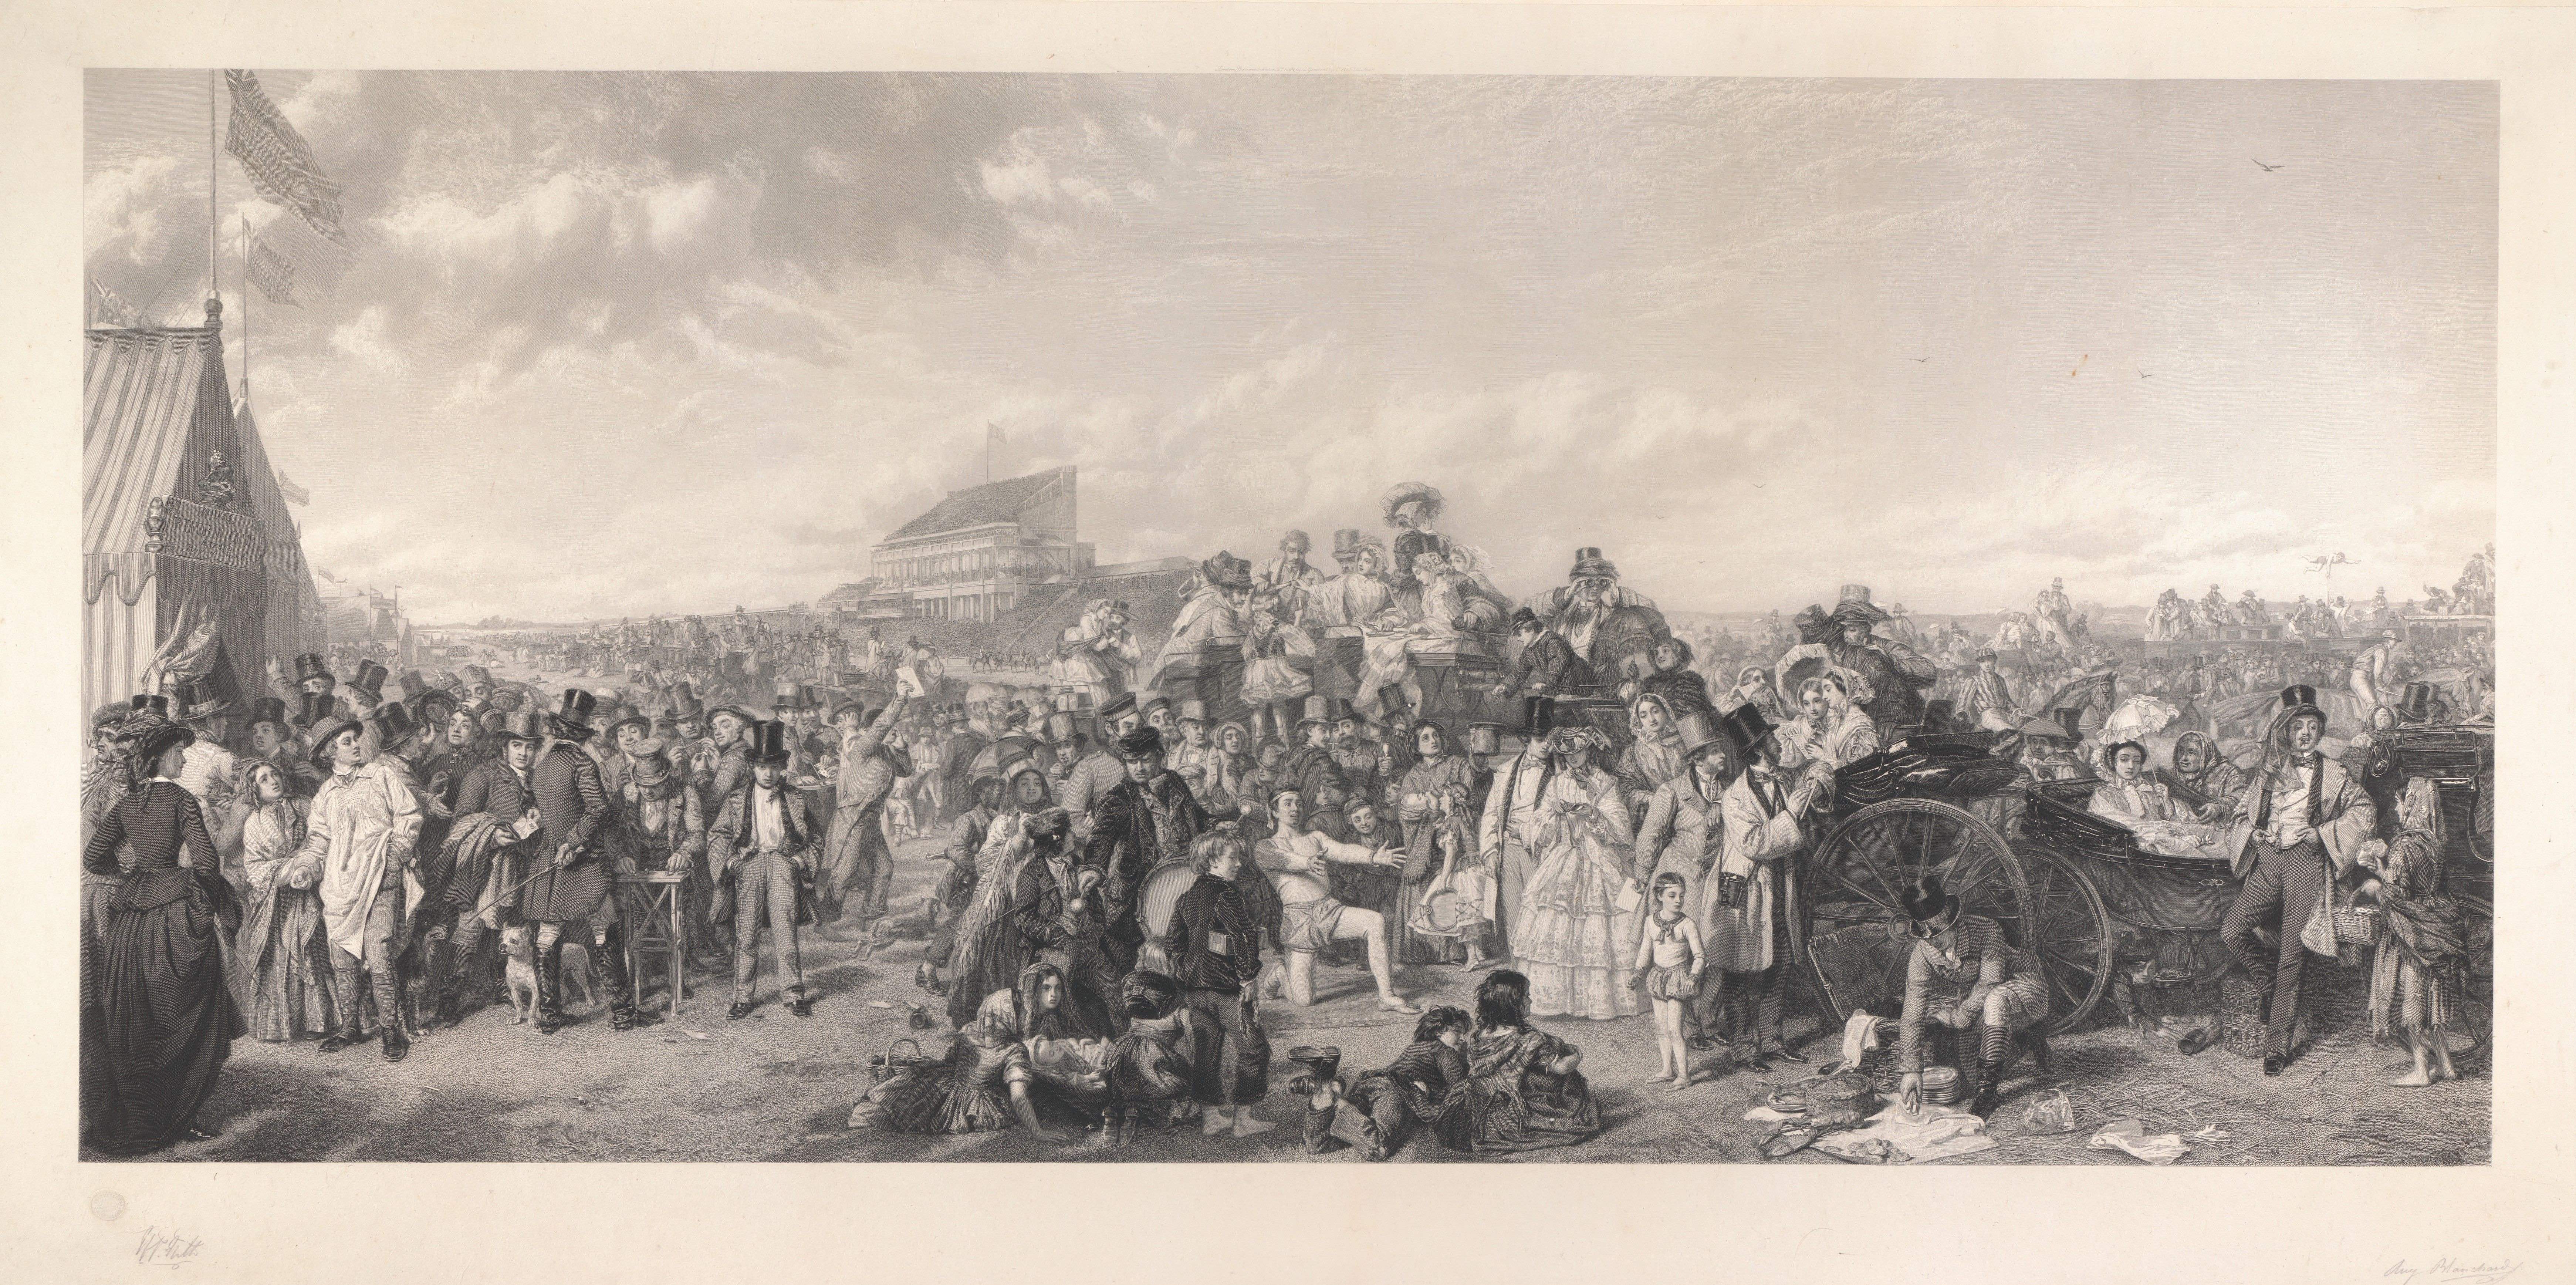 "Derby Day," circa 1858, by Auguste Blanchard after William Powell Frith. Engraving